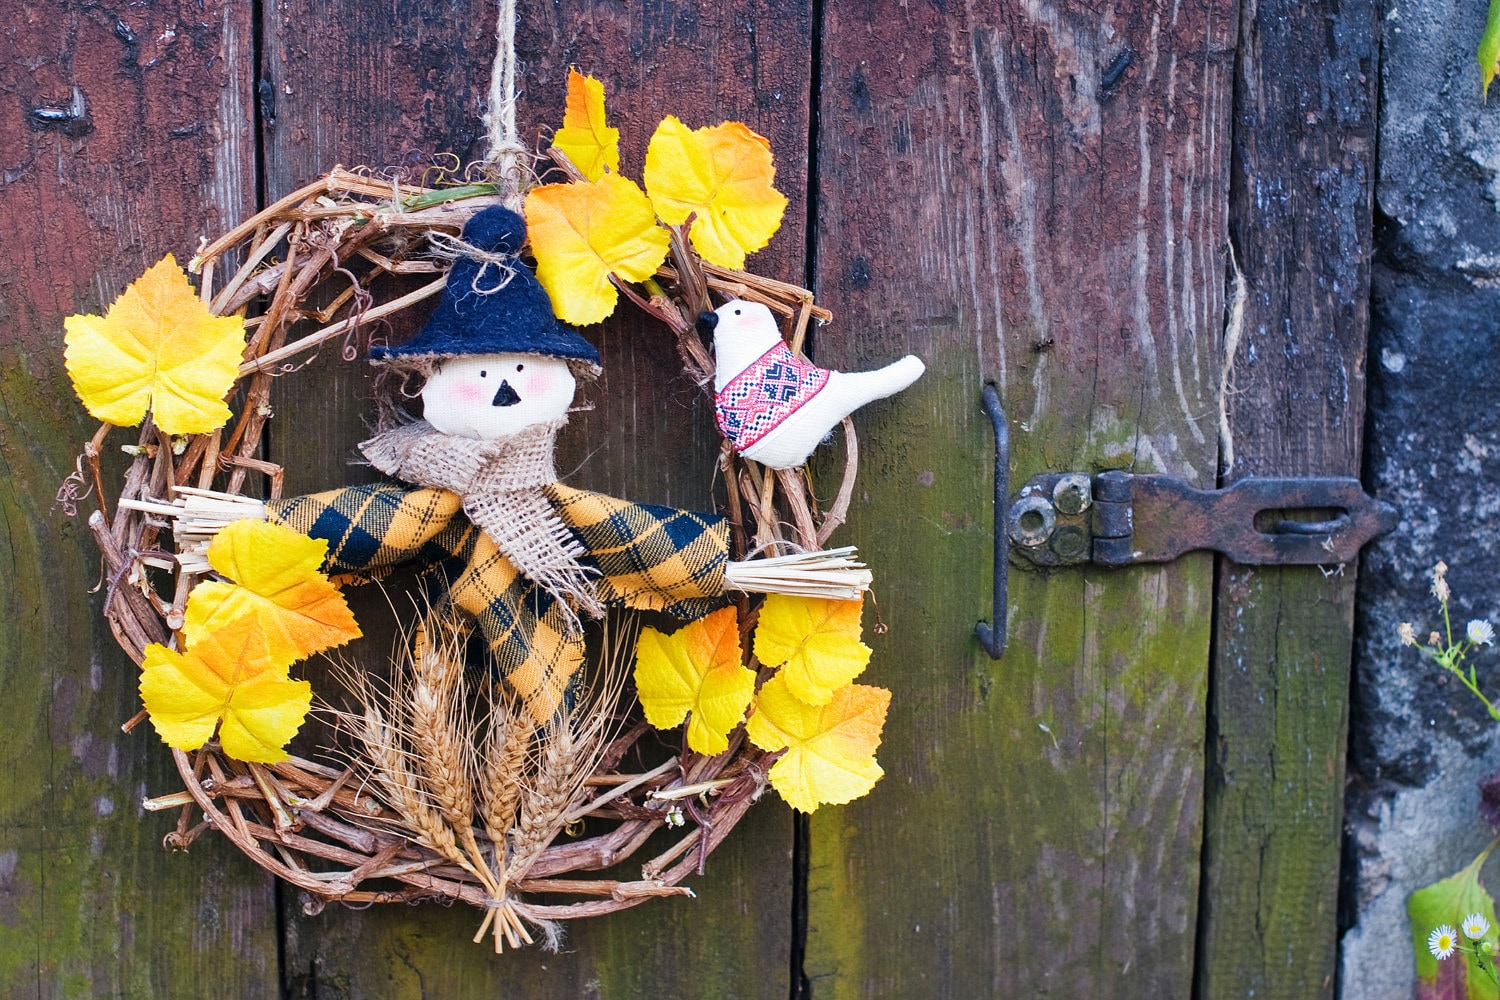 Autumn wreath "Scarecrow". Home decoration, front door decor.  Halloween, Thanksgiving day. Brown, yellow, wood, nature, eco friendly.